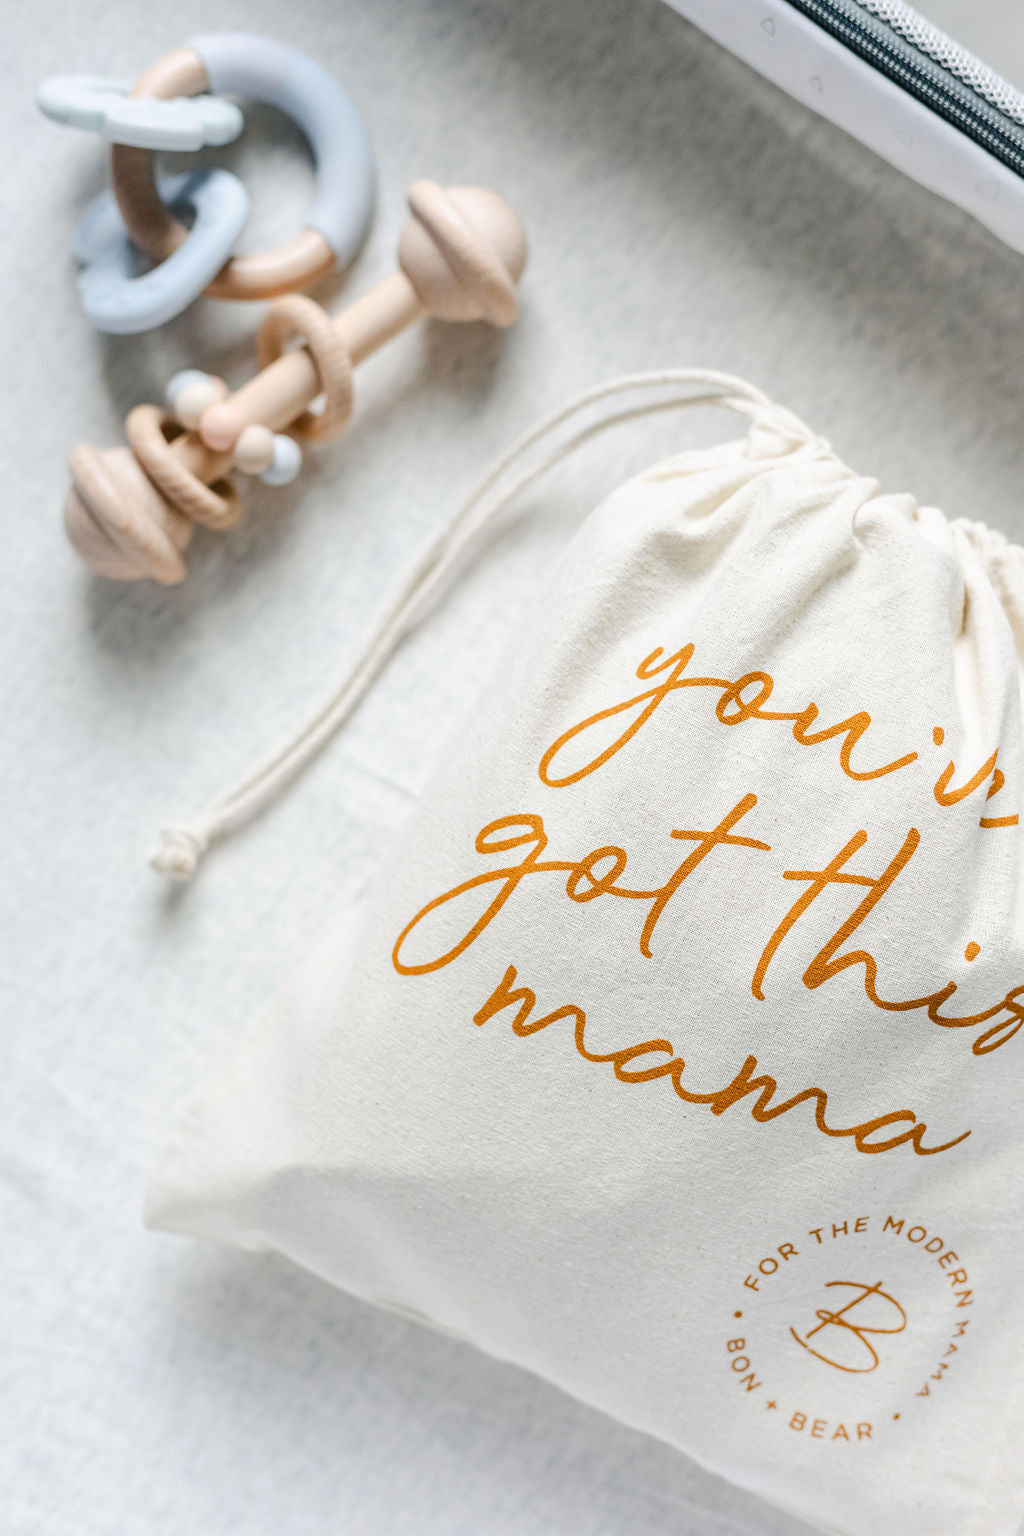 canvas-drawstring-bag-with-youve-got-this-mama-logo-next-to-baby-rattle-and-baby-teether-bon-and-bear